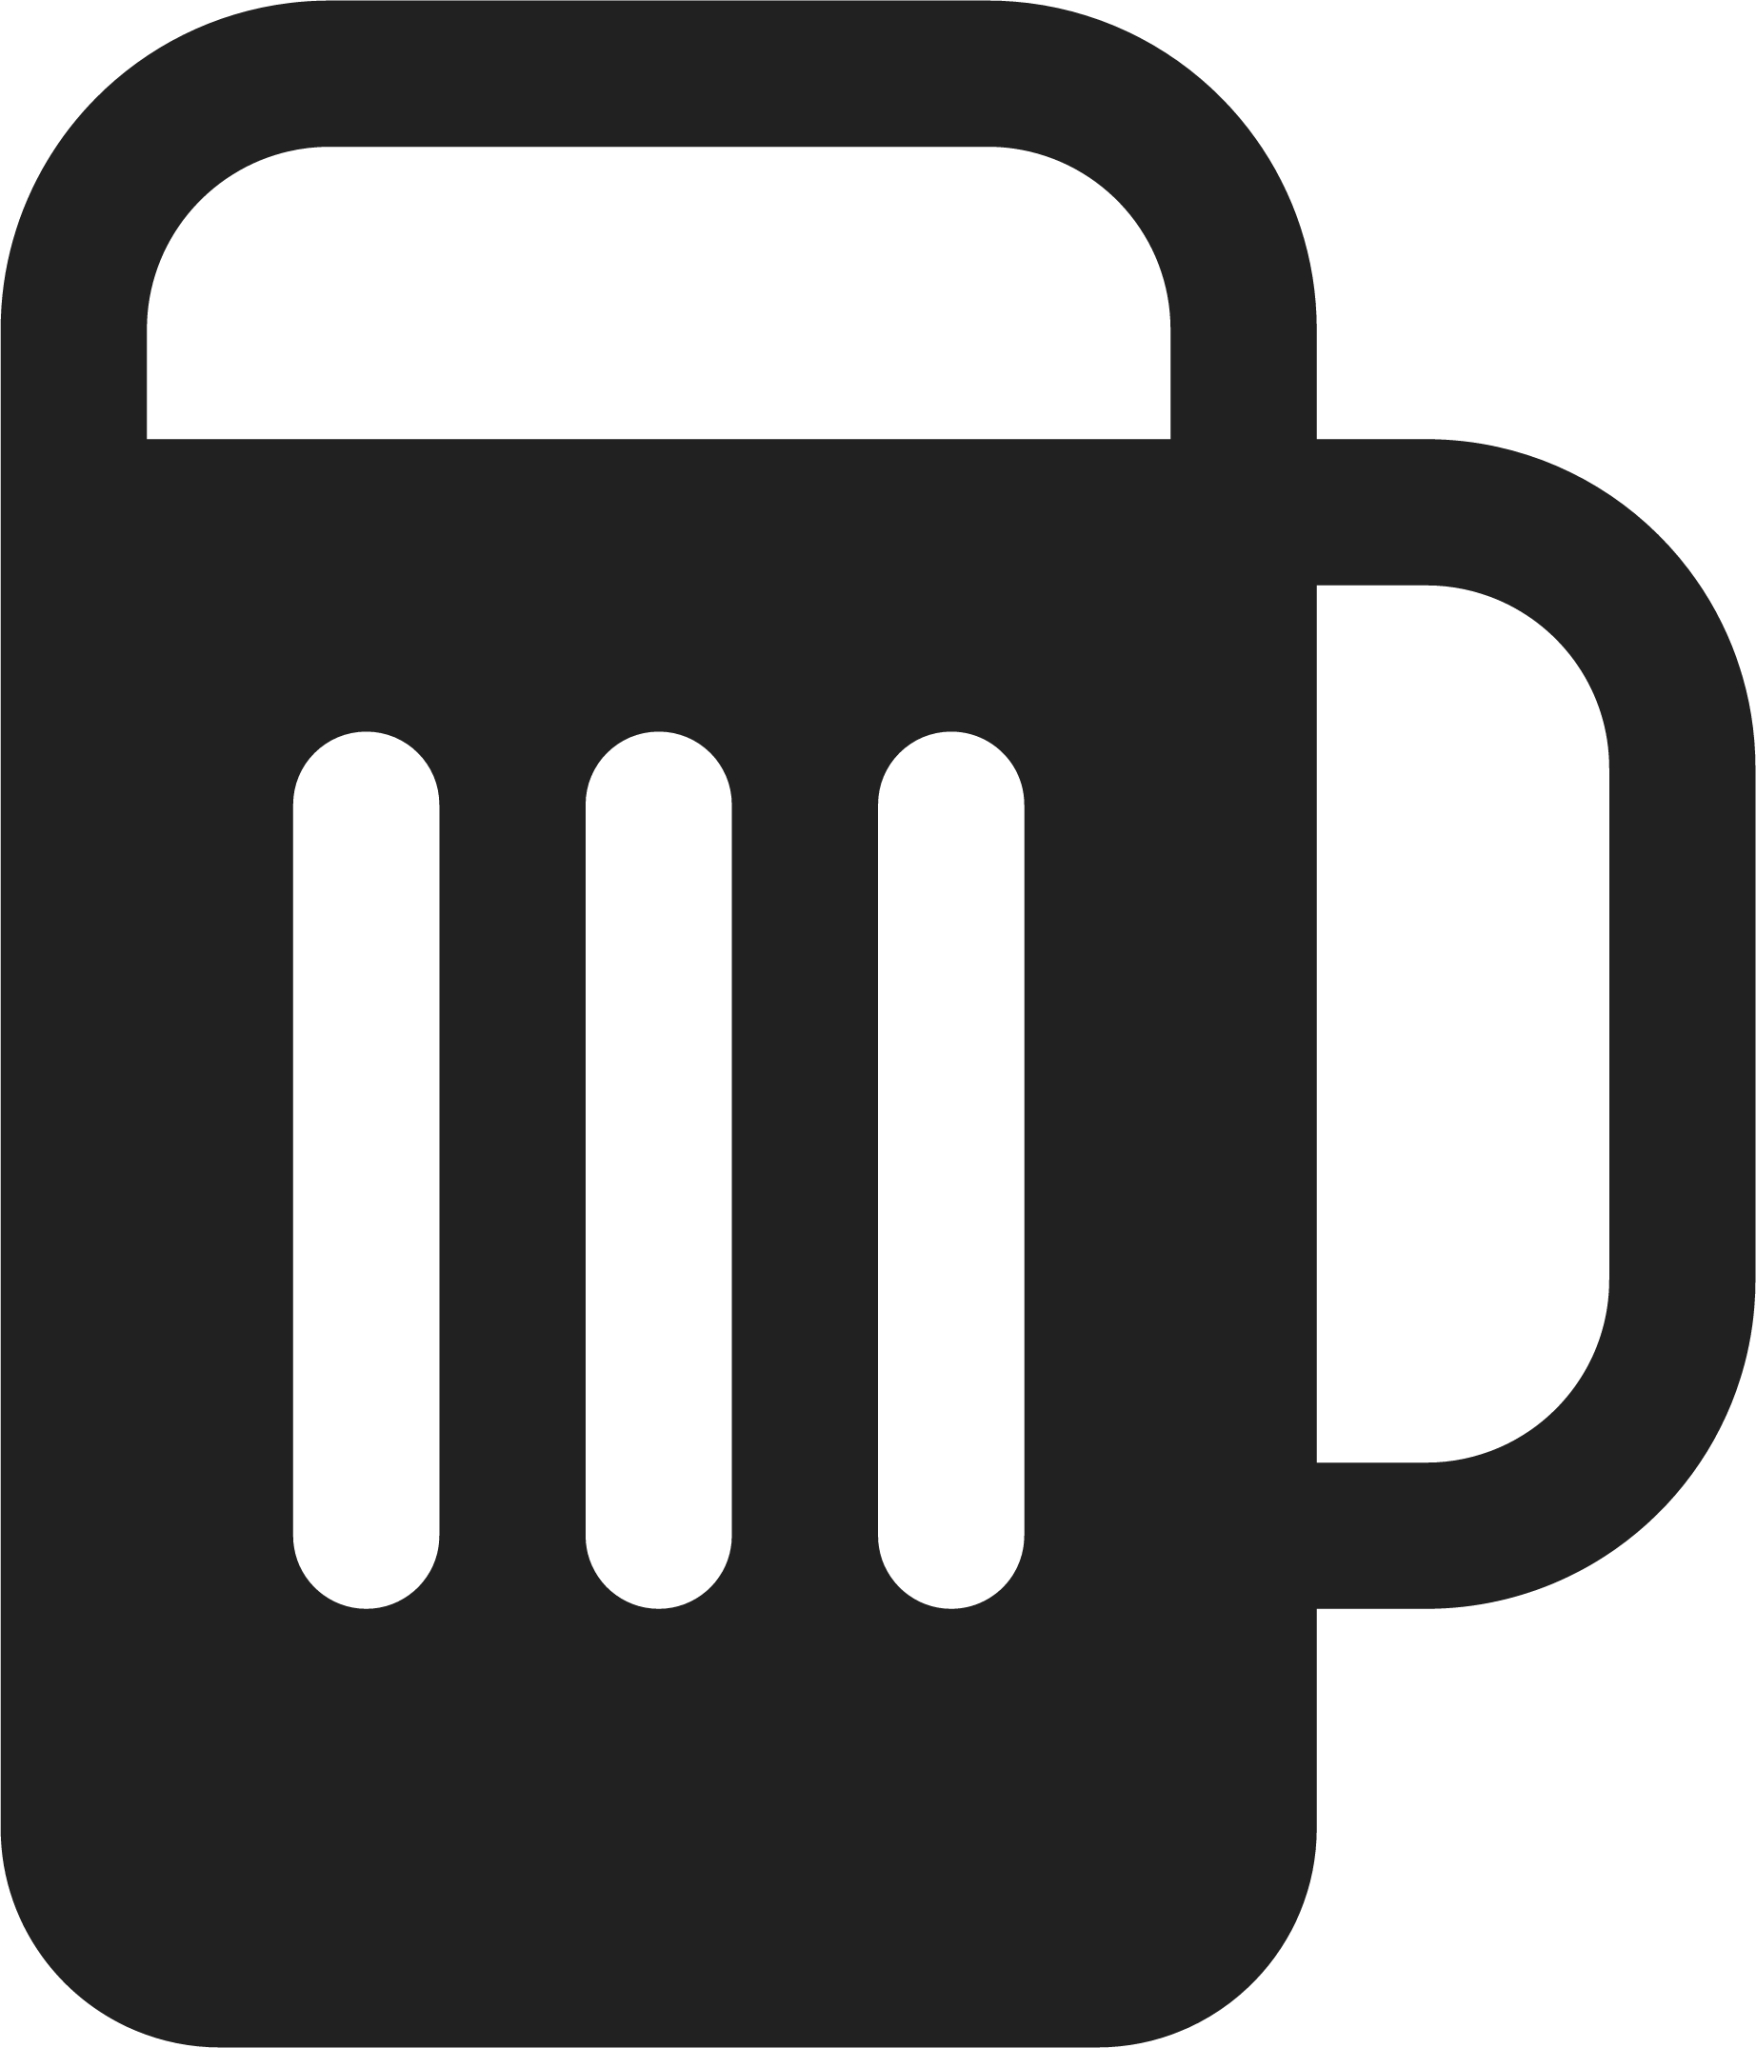 Drink Beer icon